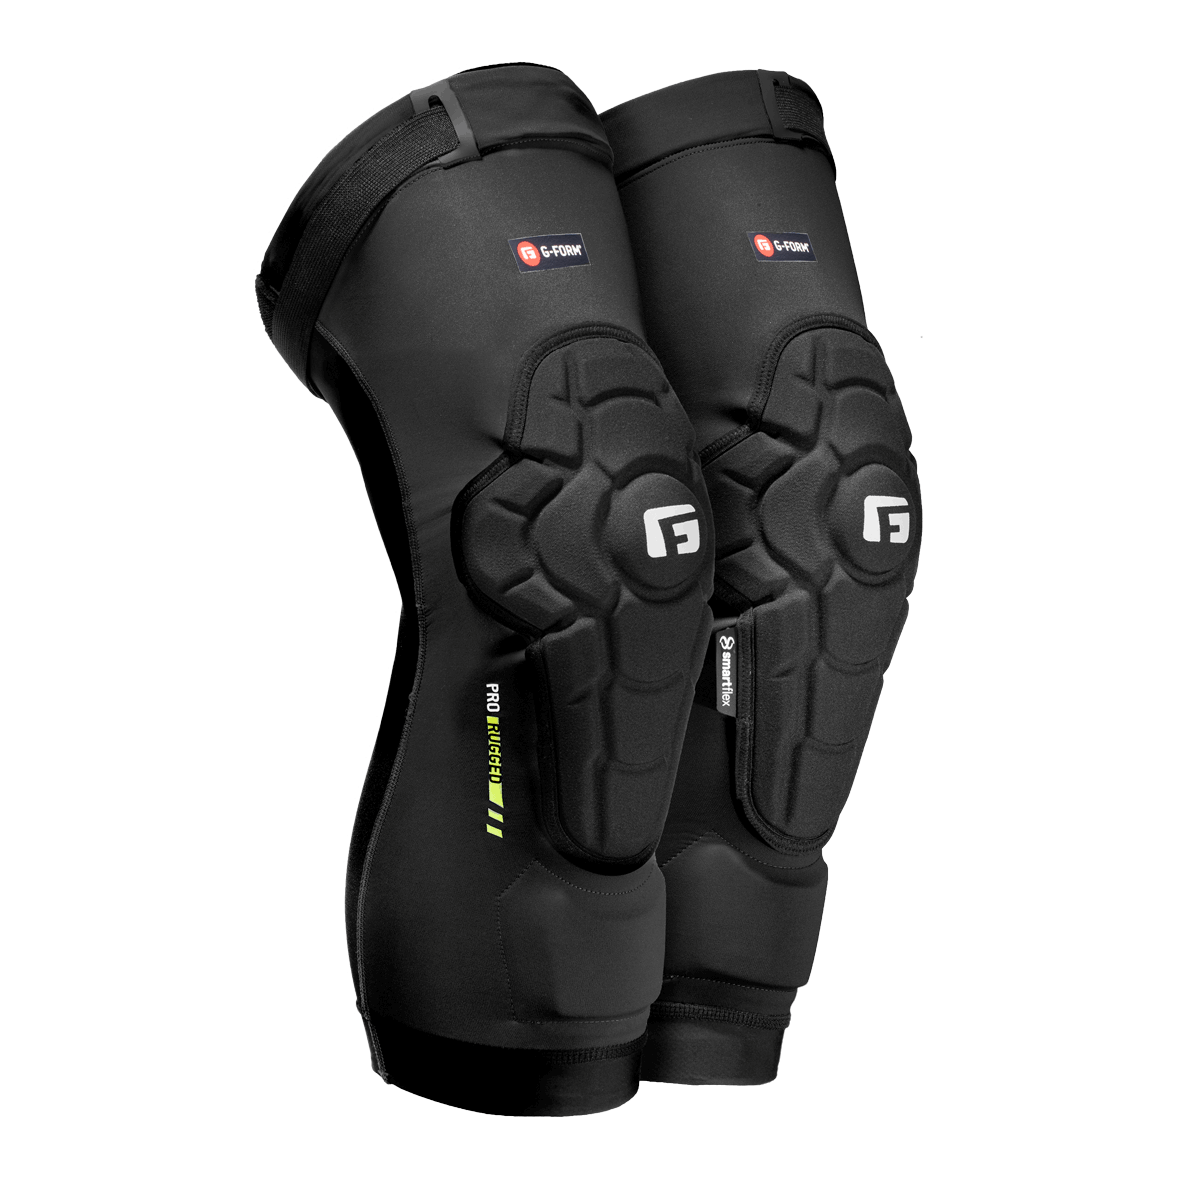 Pro-Rugged 2 Knee Guard Protection